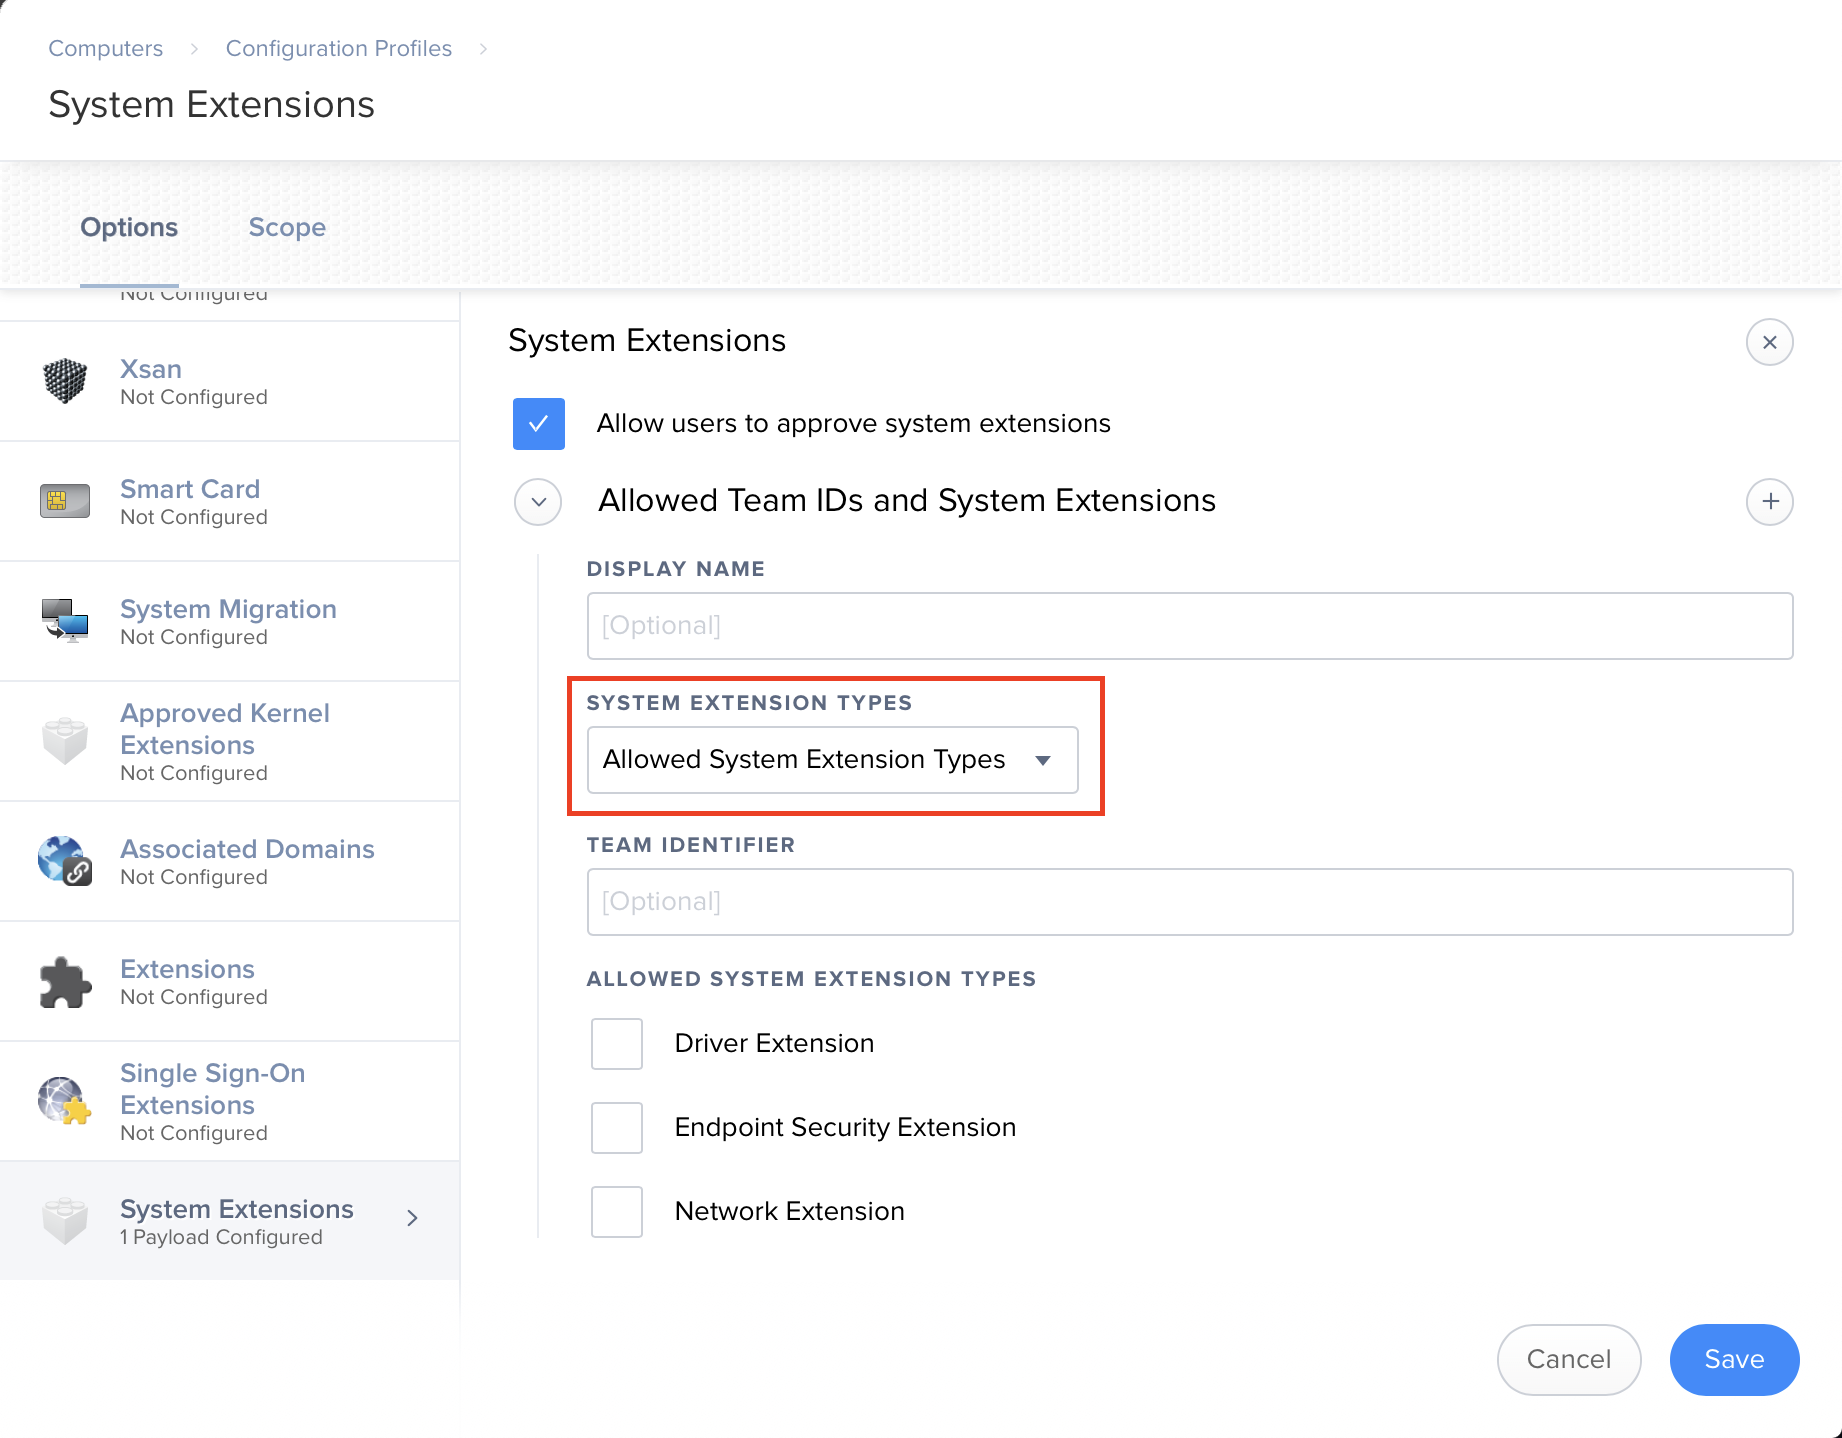 Allow System Extensions by specific extension types, with option to limit by Team ID.